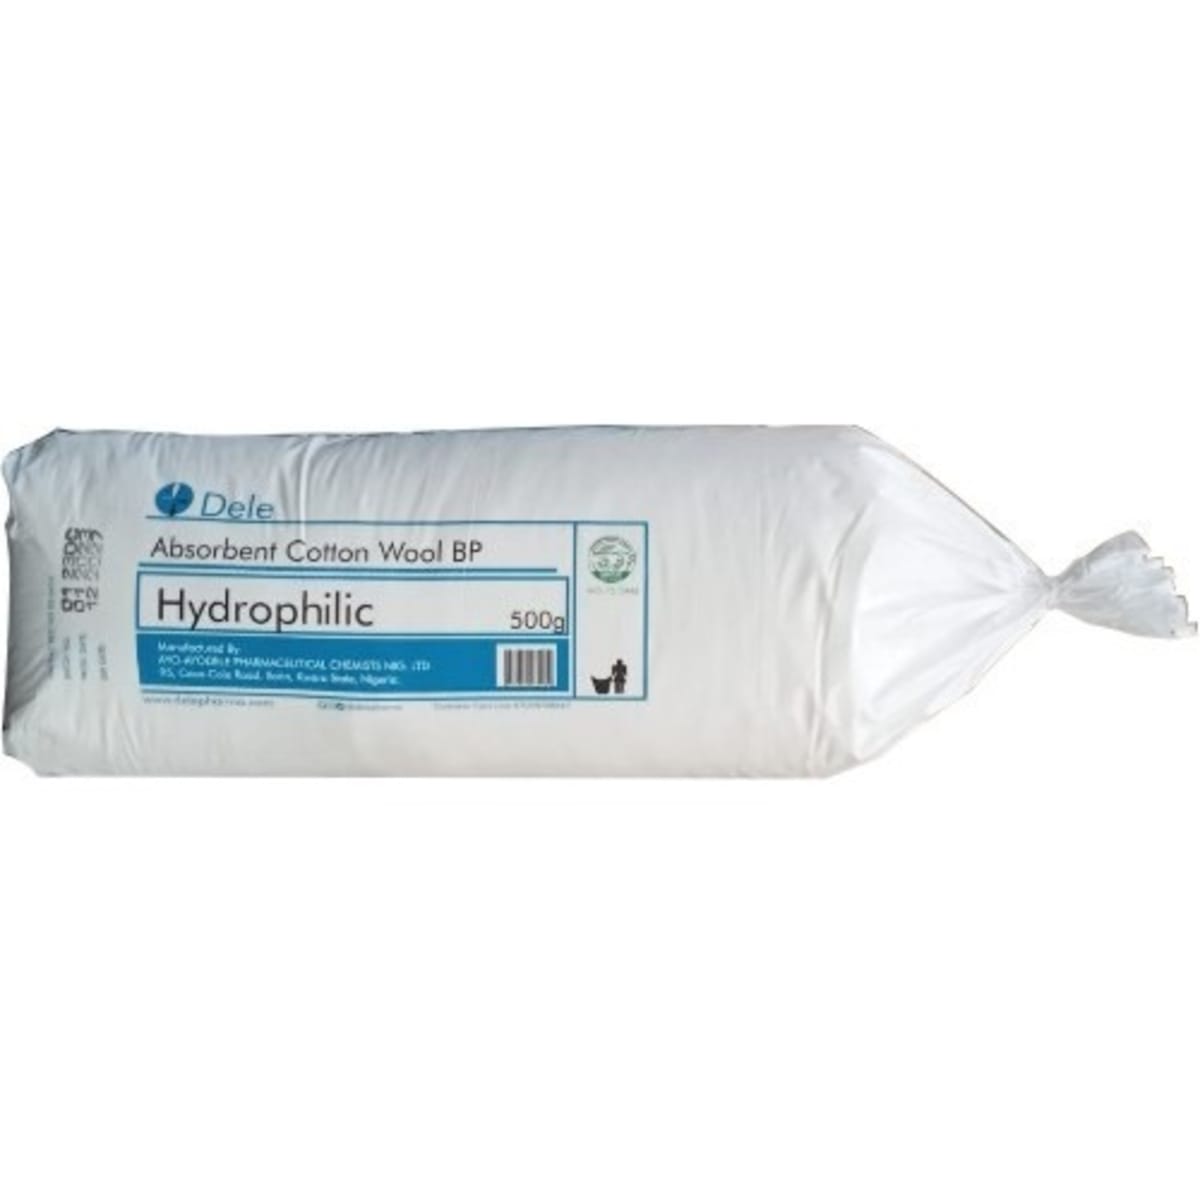 Dele Absorbent Cotton Wool 450g Hydrophilic